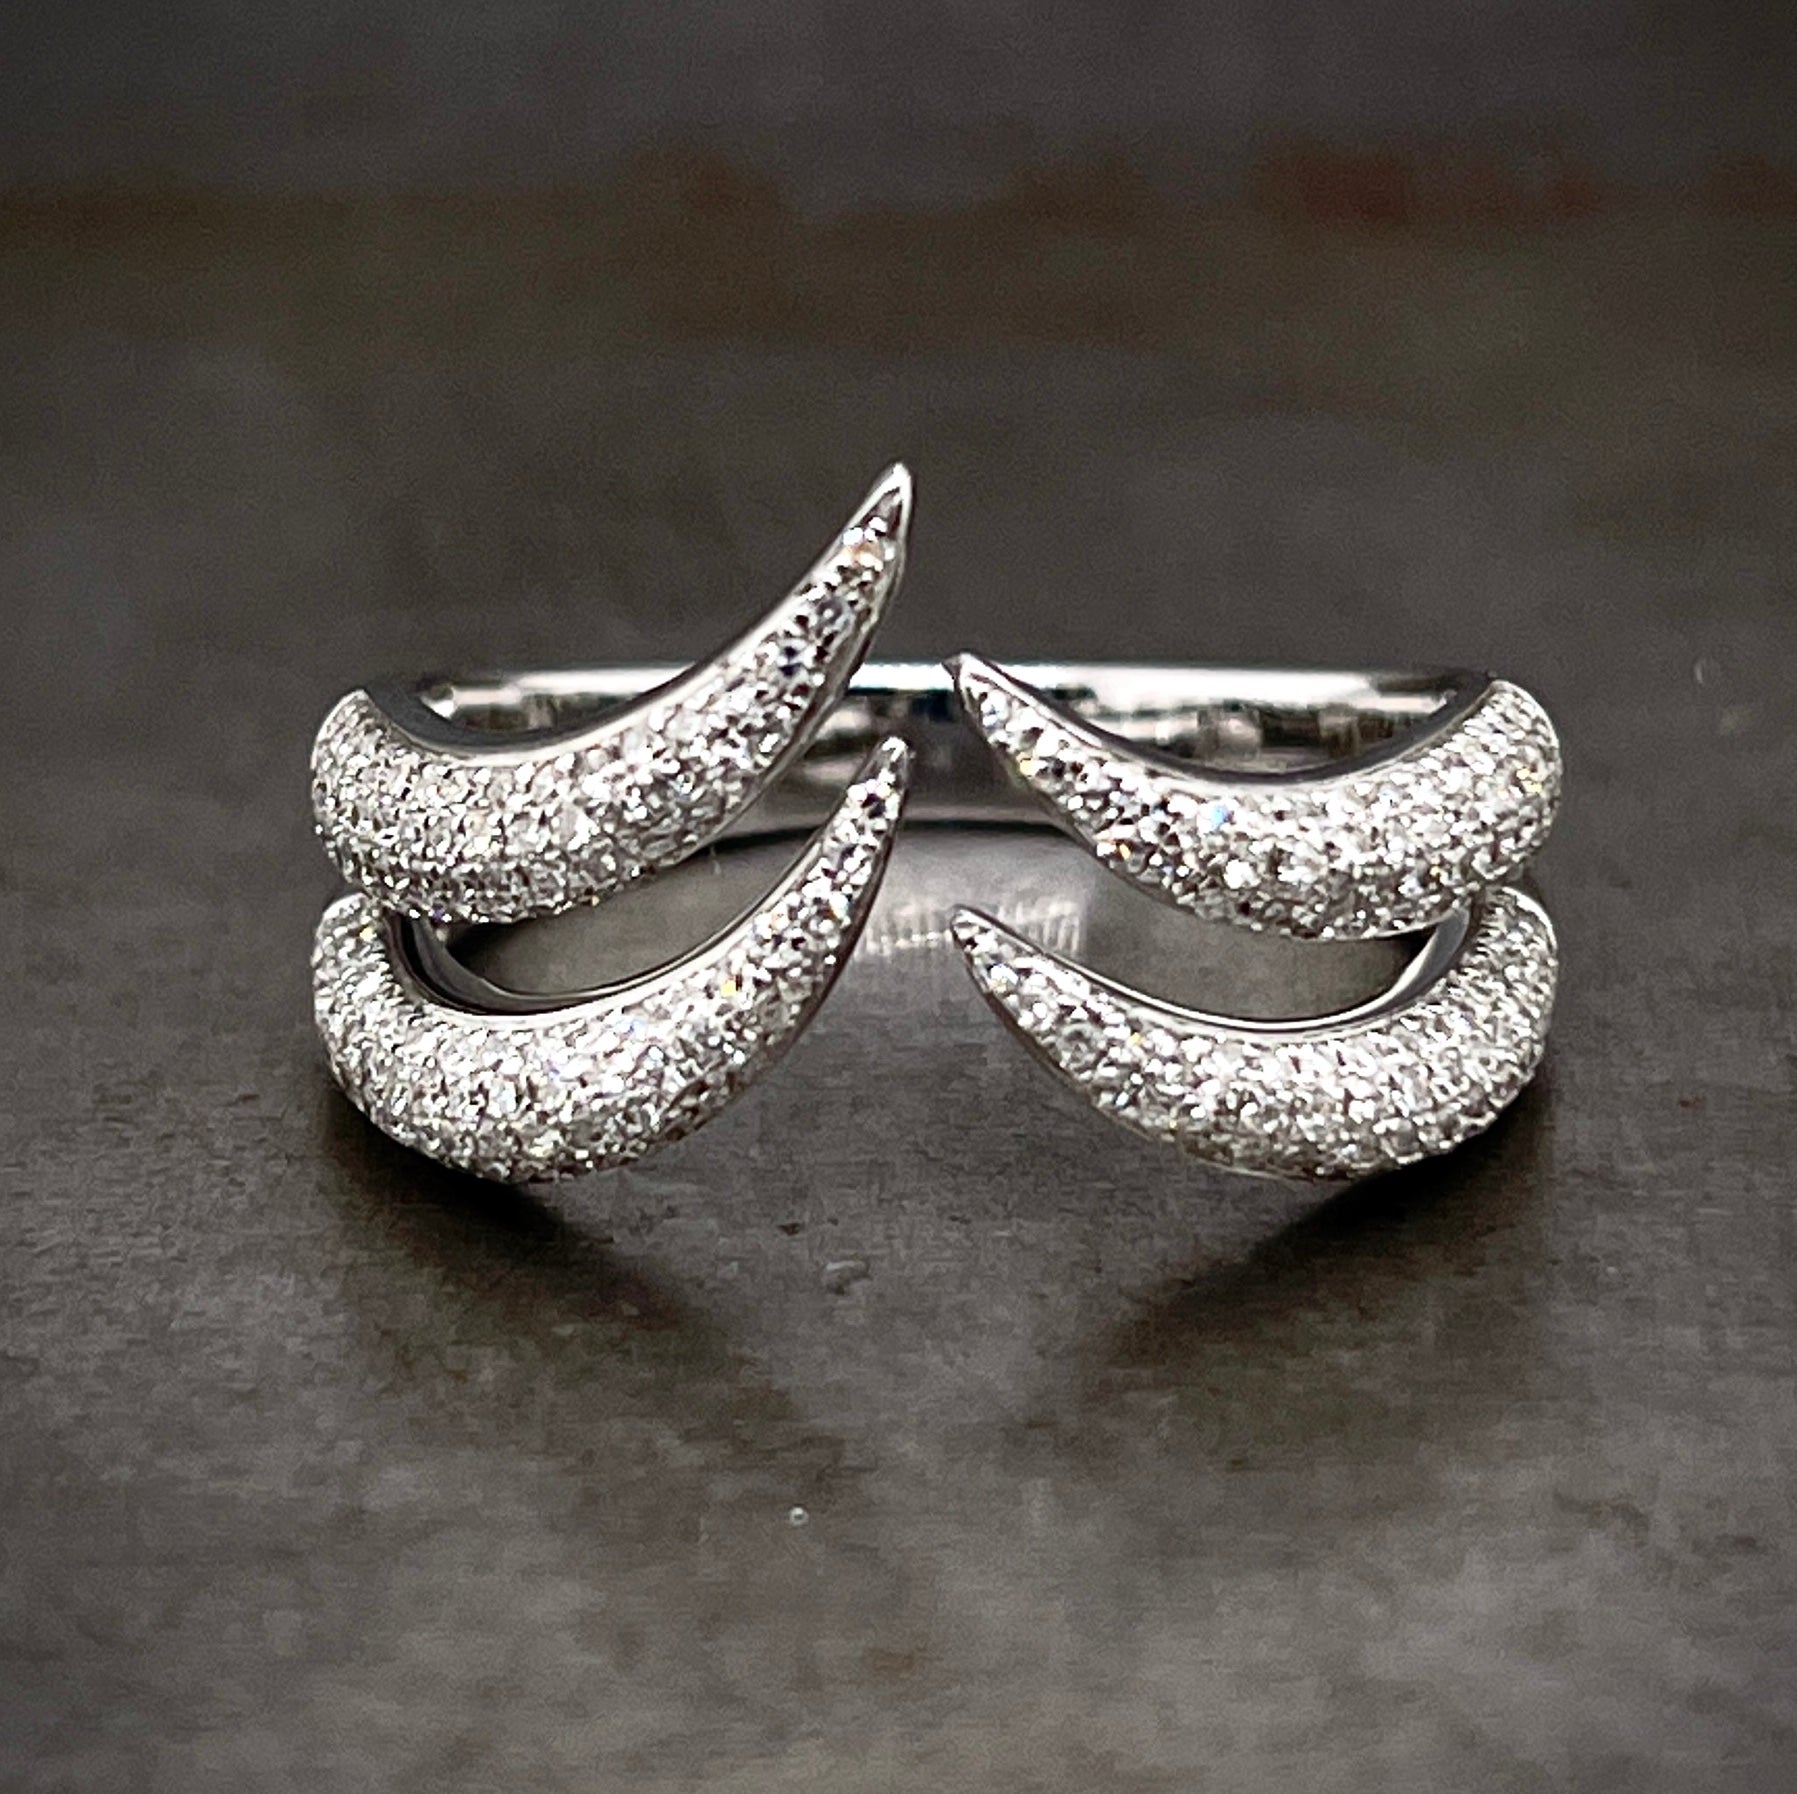 Frontal view of diamond claw ring. Made from 14 karat white gold this ring features two curved claws on the left and right side. The claws curve upward and do not connect, creating a negative space ring. Round brilliant diamonds cover the entirety of the ring.